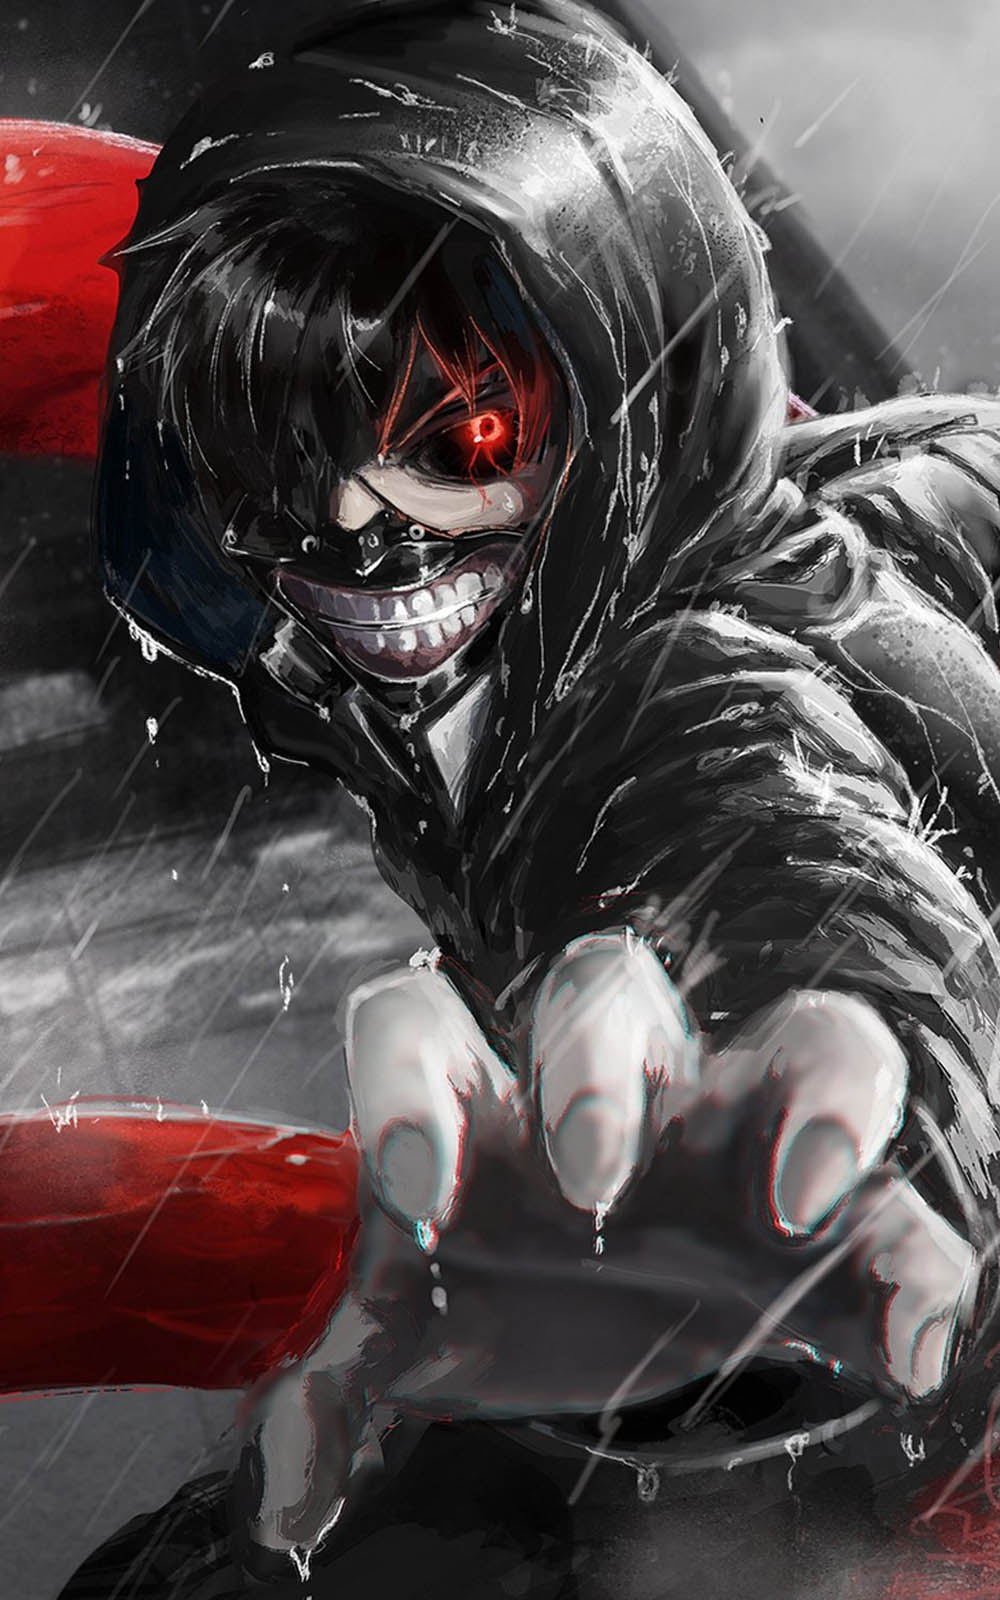 Dark Anime Hd Wallpapers For Mobile - Goimages Link